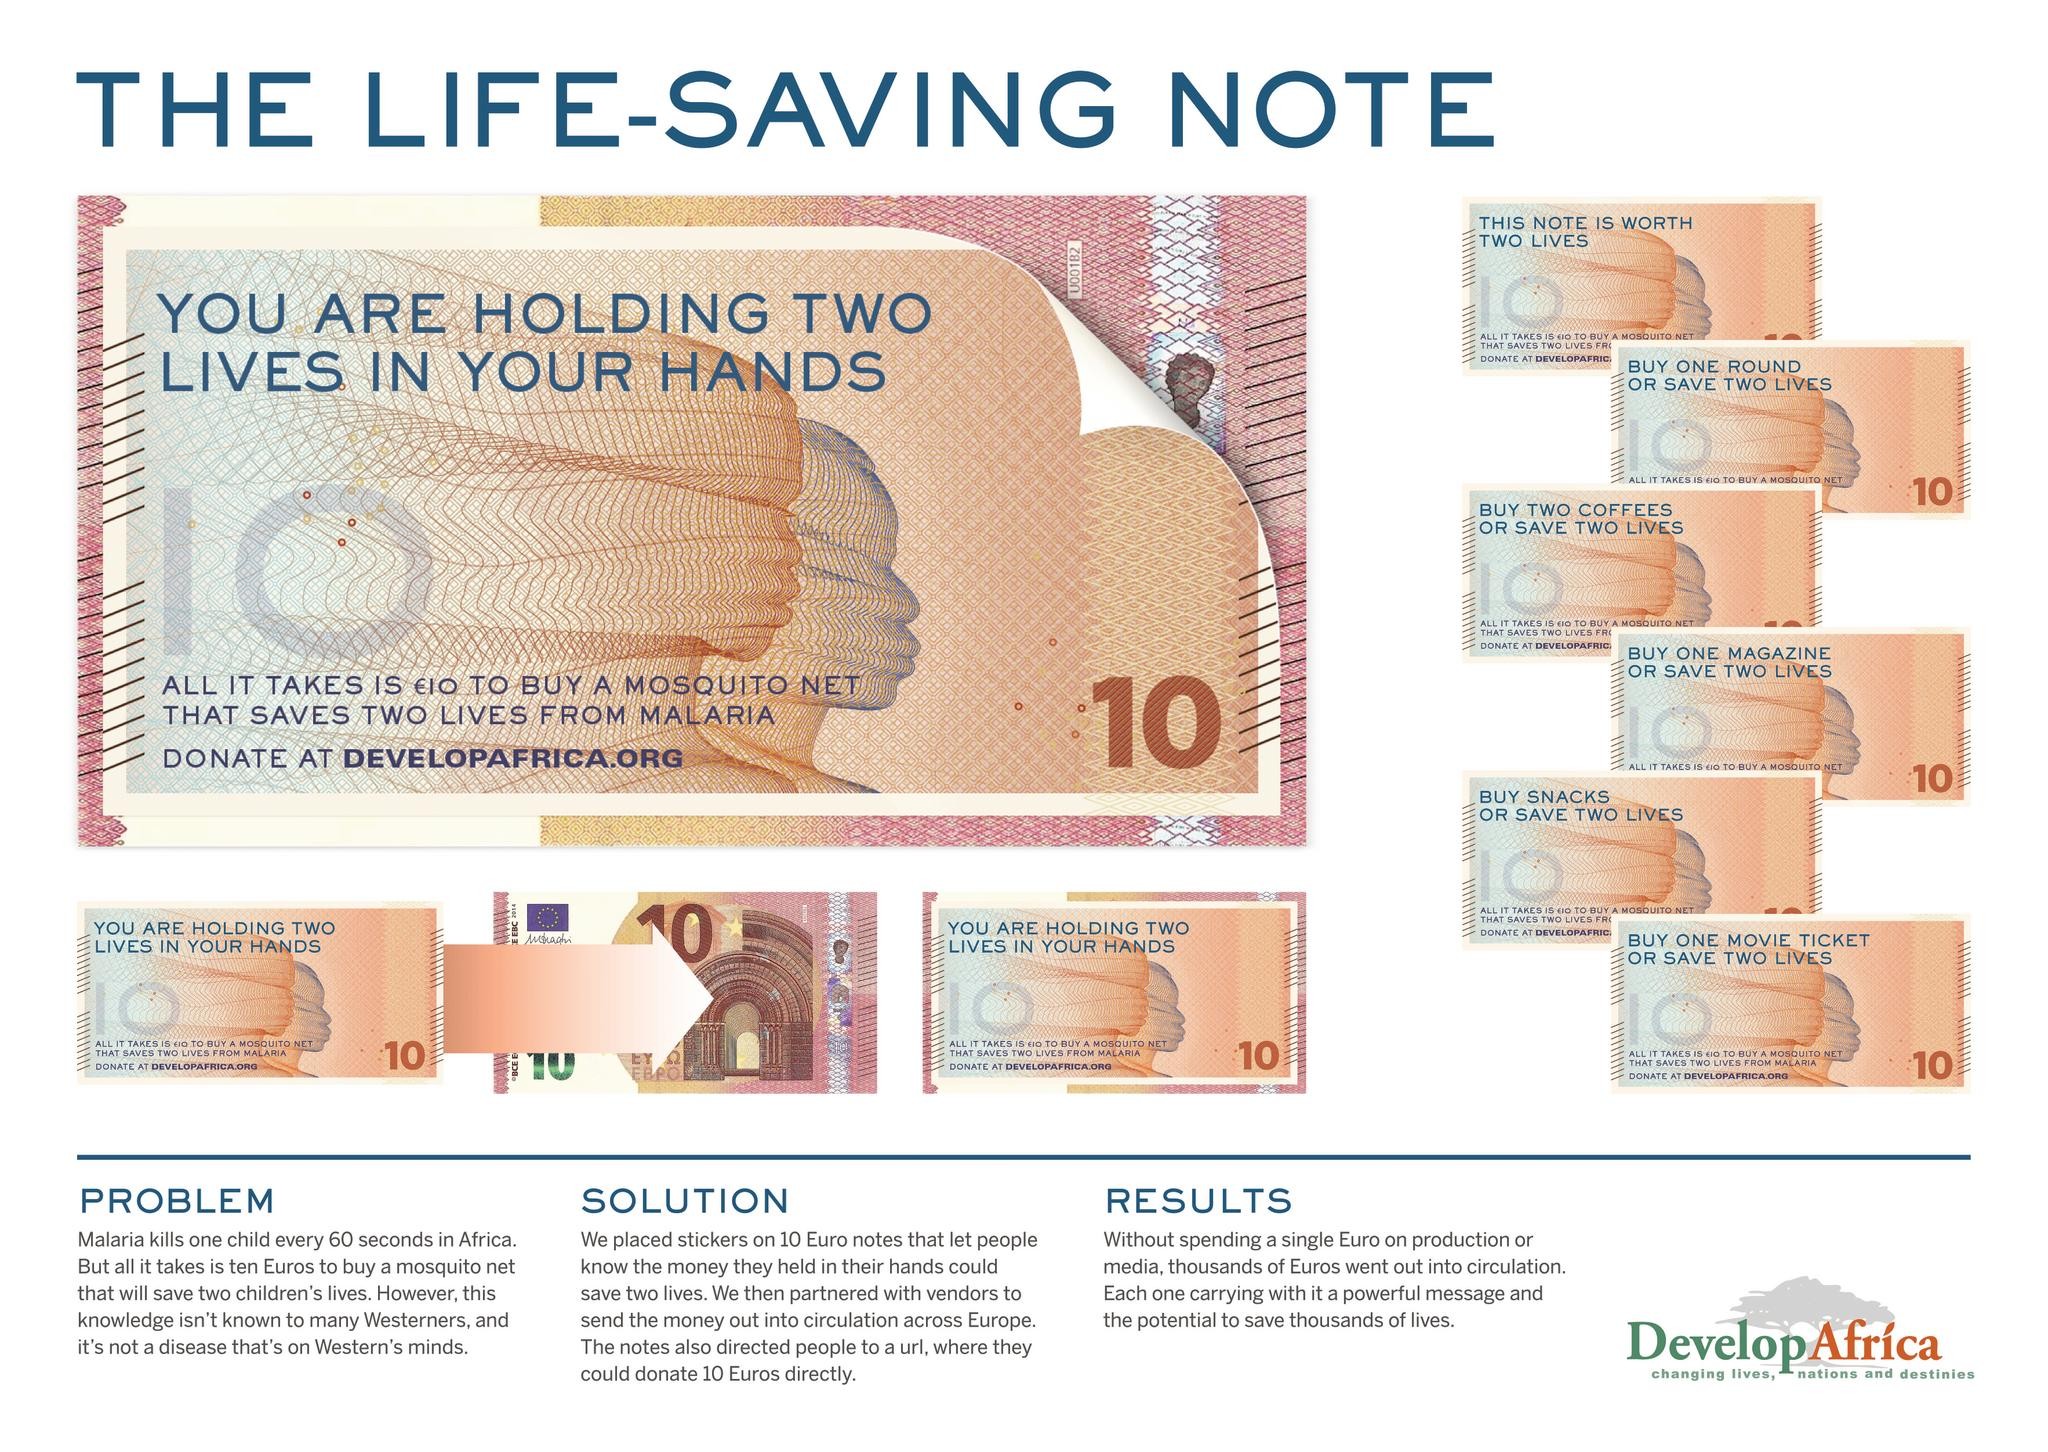 The Life Saving Note